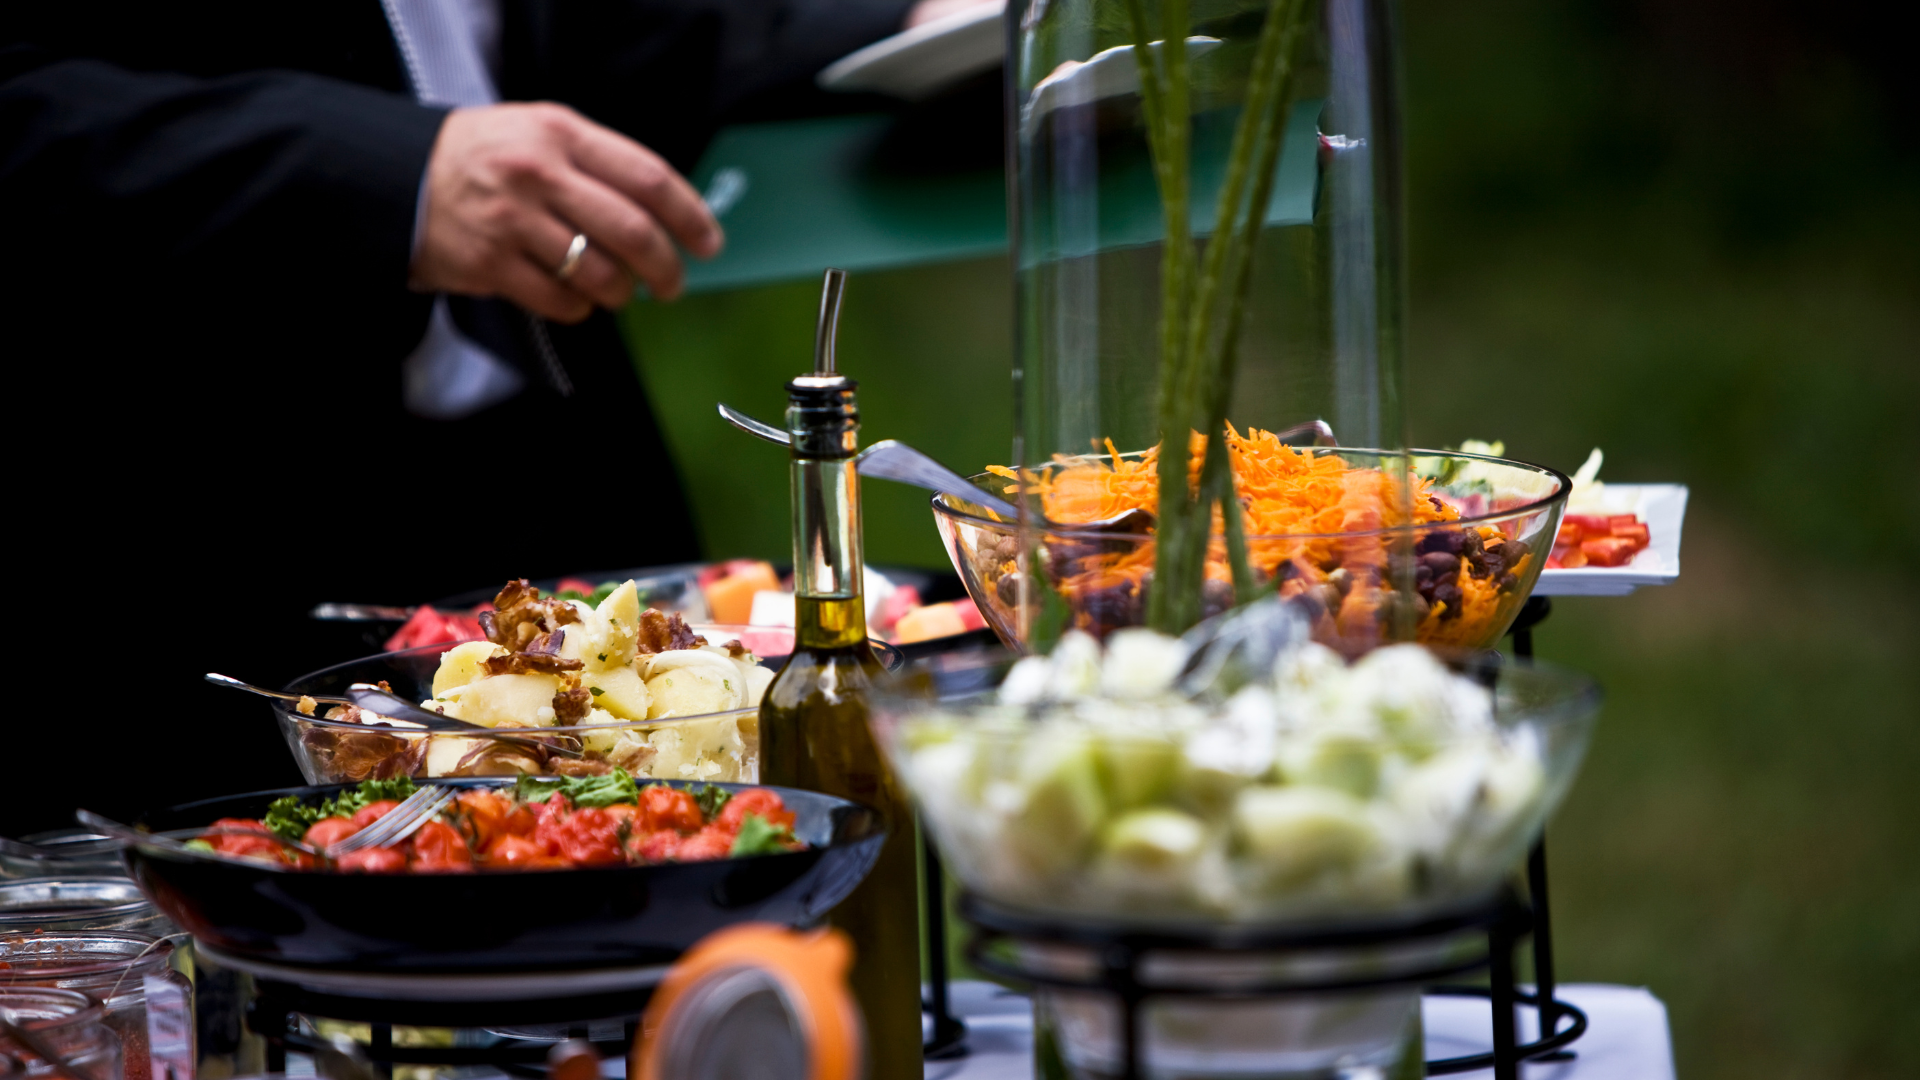 Catering Options to Consider for a Business Event